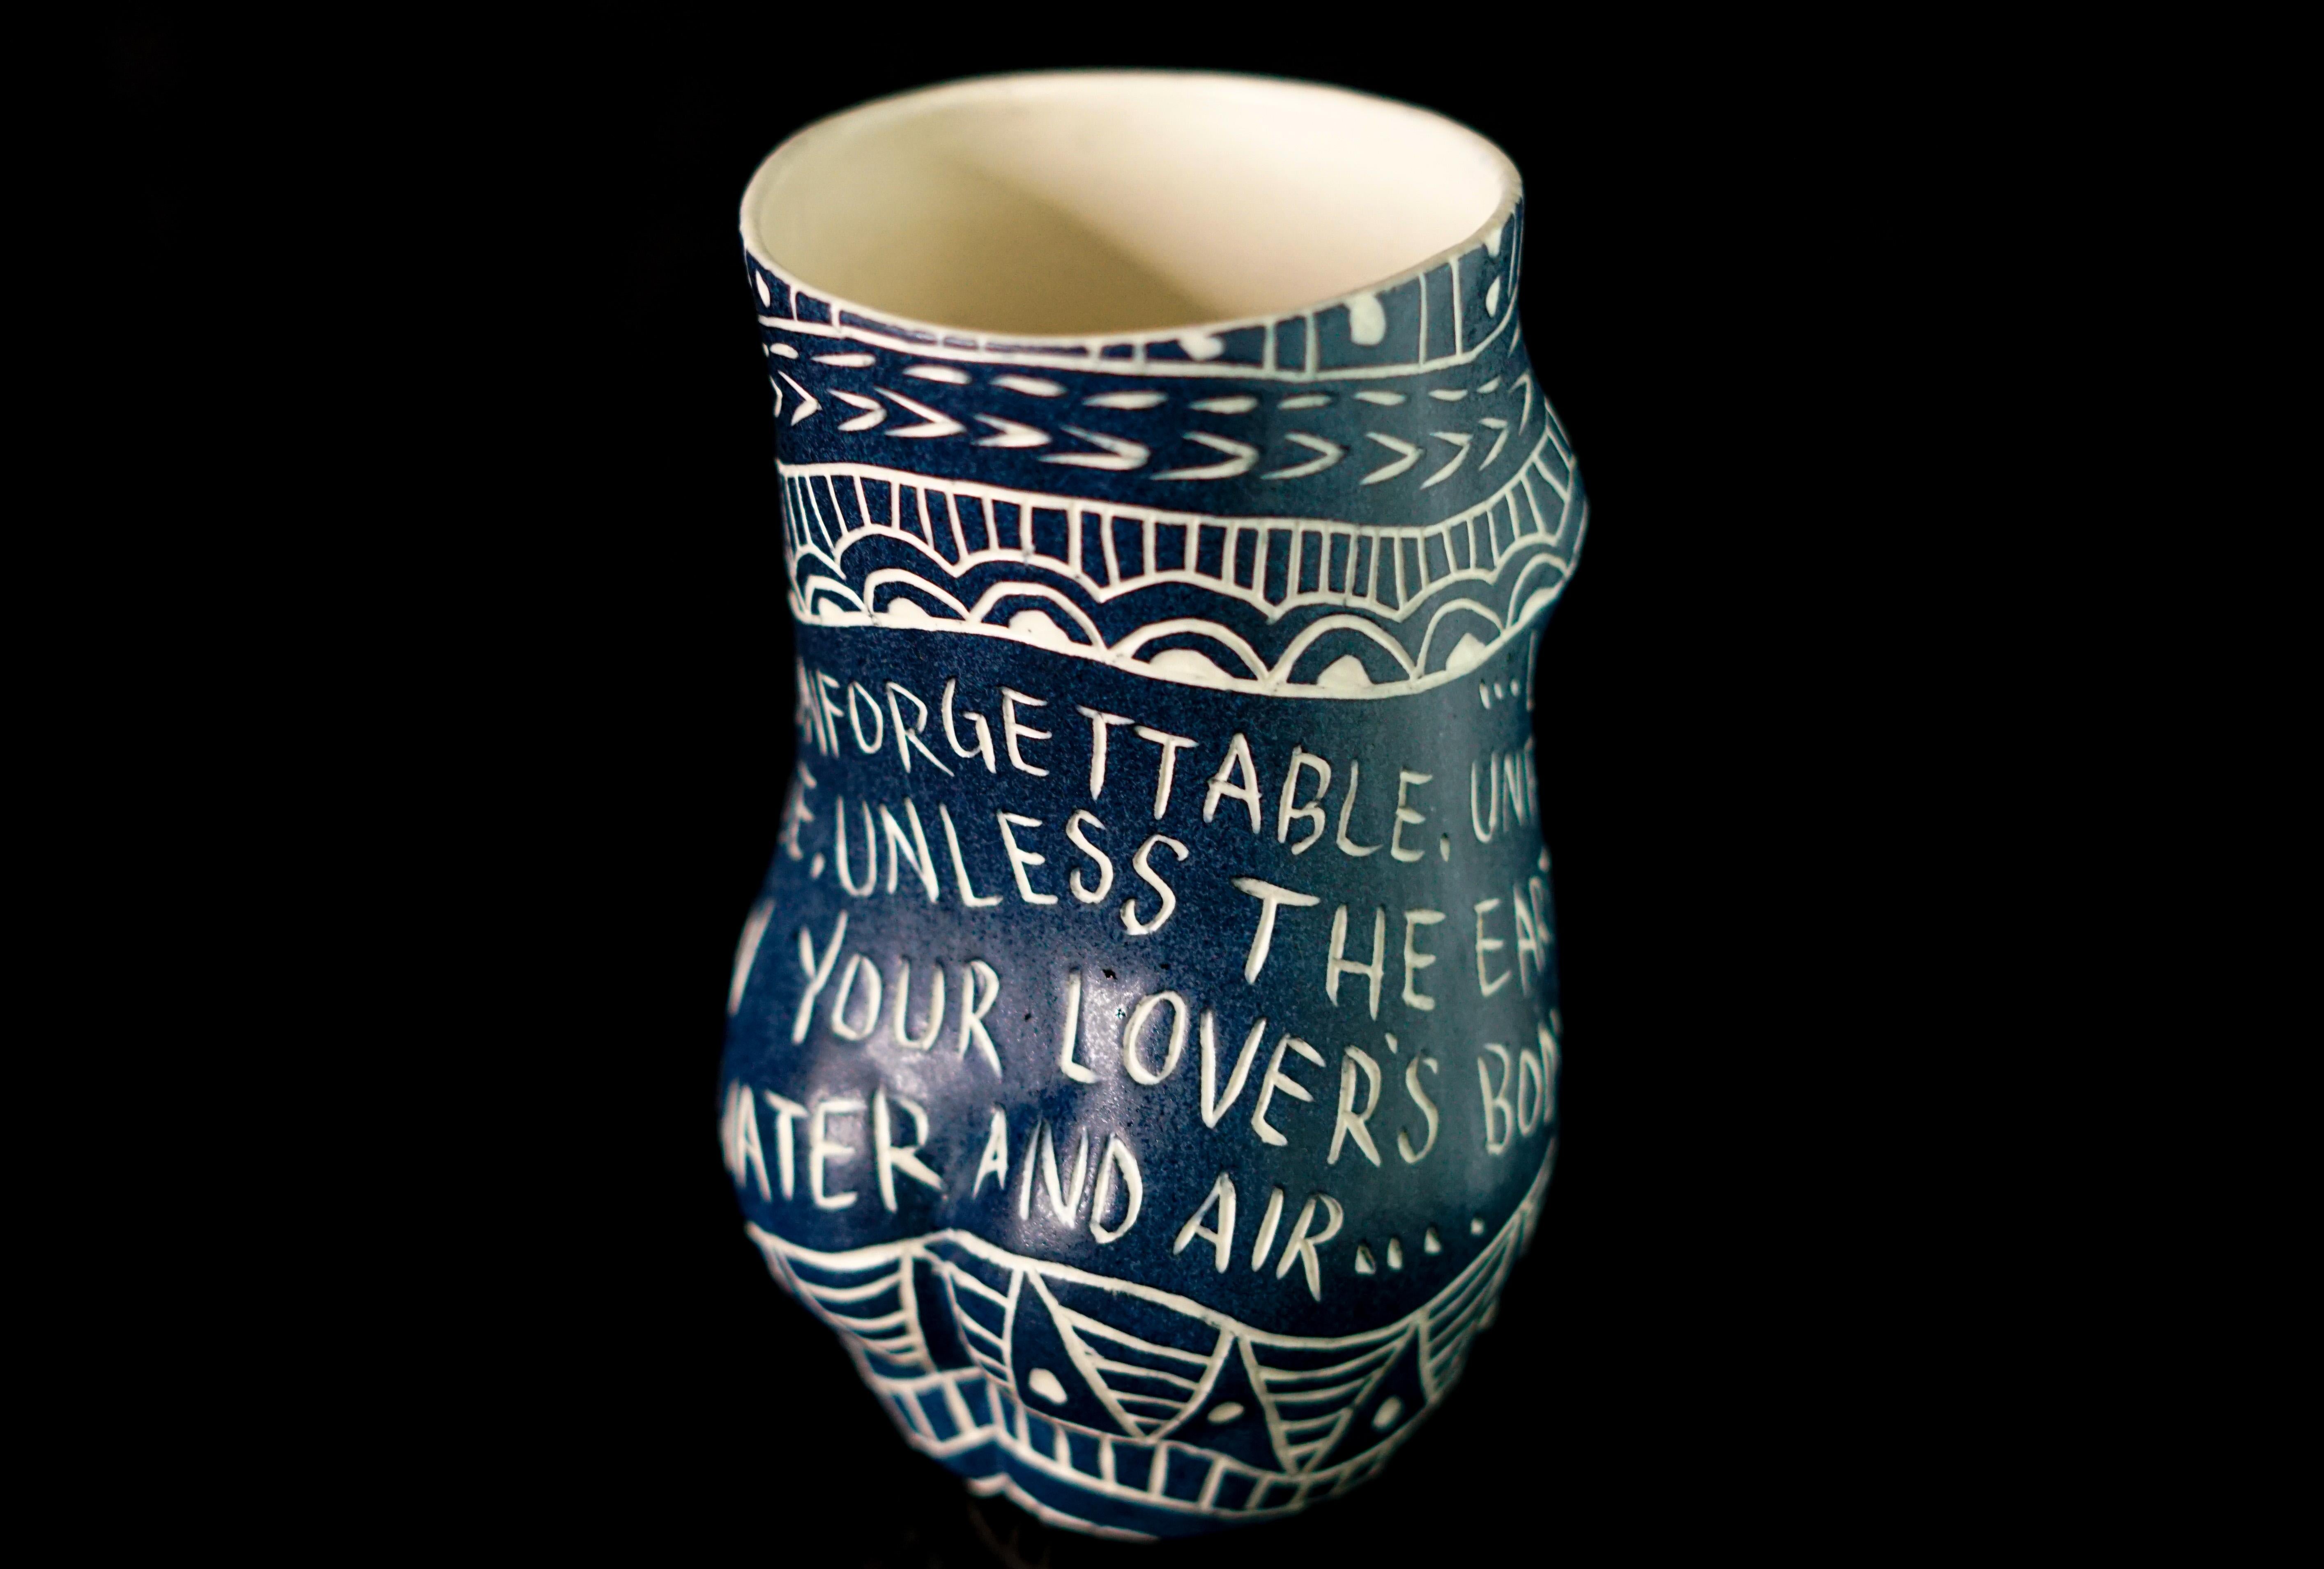 Love (Between Women)…, Porcelain Cup with Sgraffito Detailing - Black Figurative Sculpture by Alex Hodge